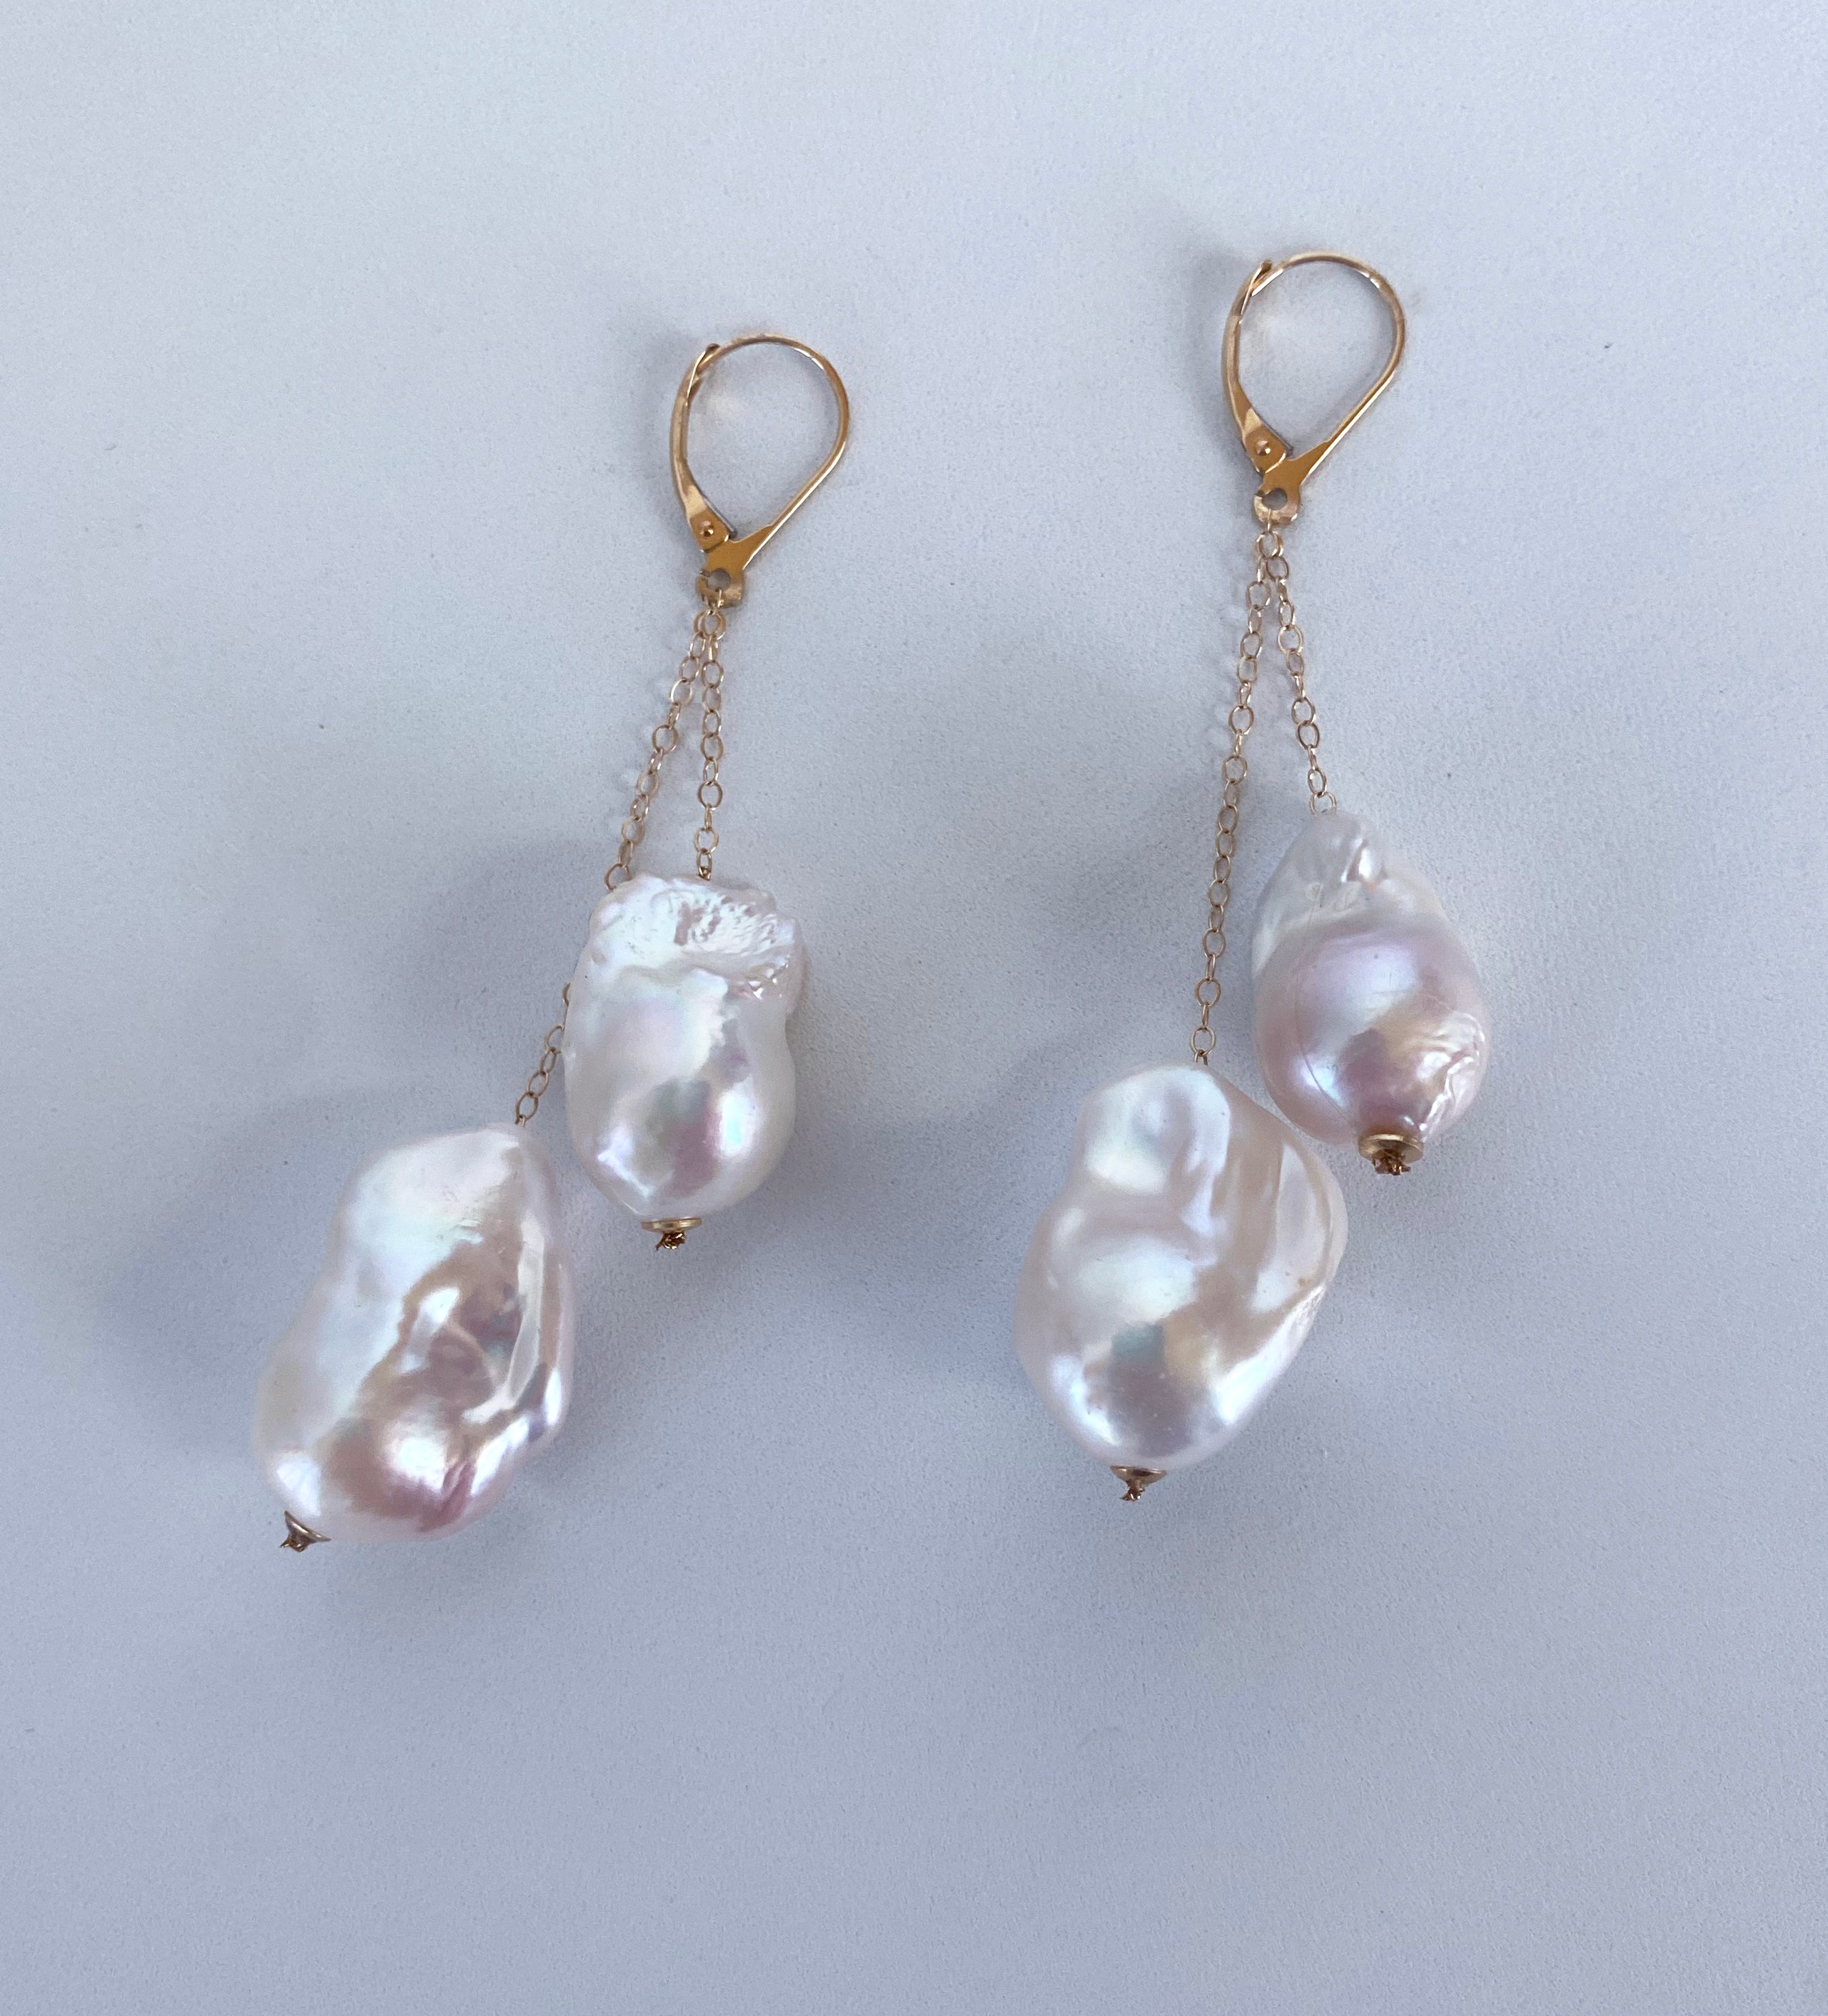 Gorgeous fun pair of Earrings by Marina J. This pair features a total of four cultured white Baroque Pearls displaying a gorgeous multi color iridescent luster. Two Pearls hang from solid 14k Yellow Gold chain on each Earring. Measuring 2.5 inches